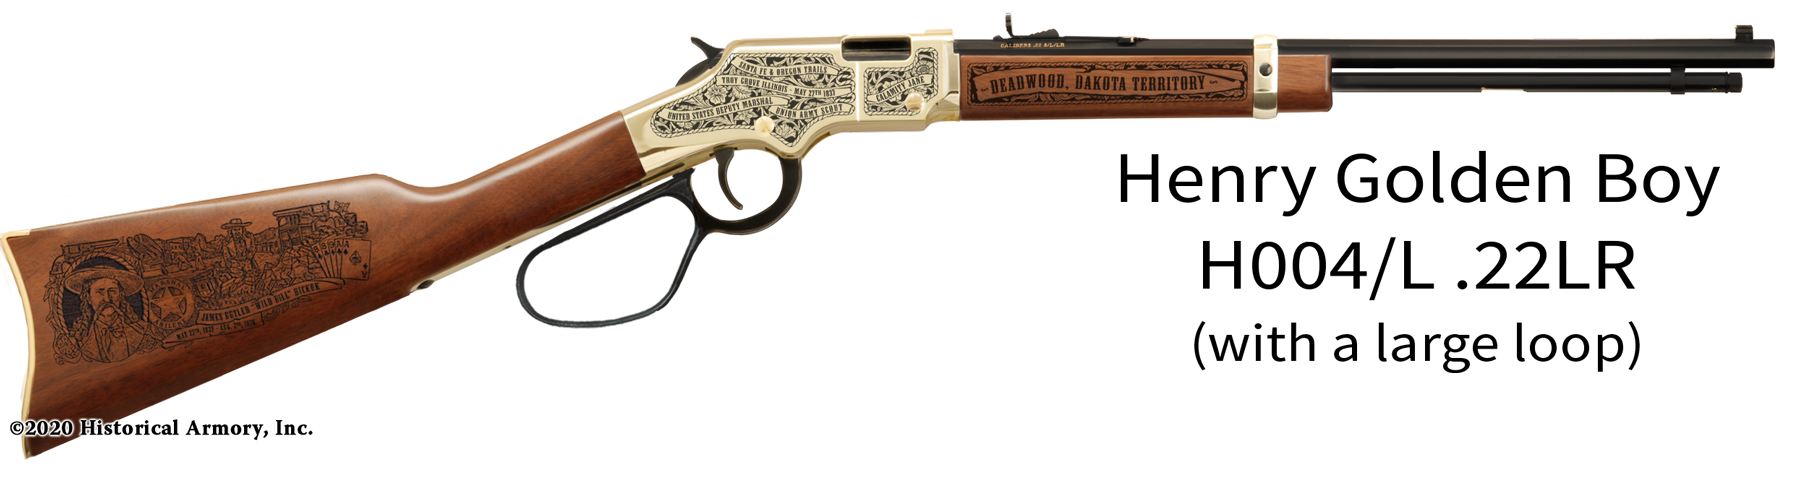 Wild Bill Hickok Limited Edition Engraved Rifle